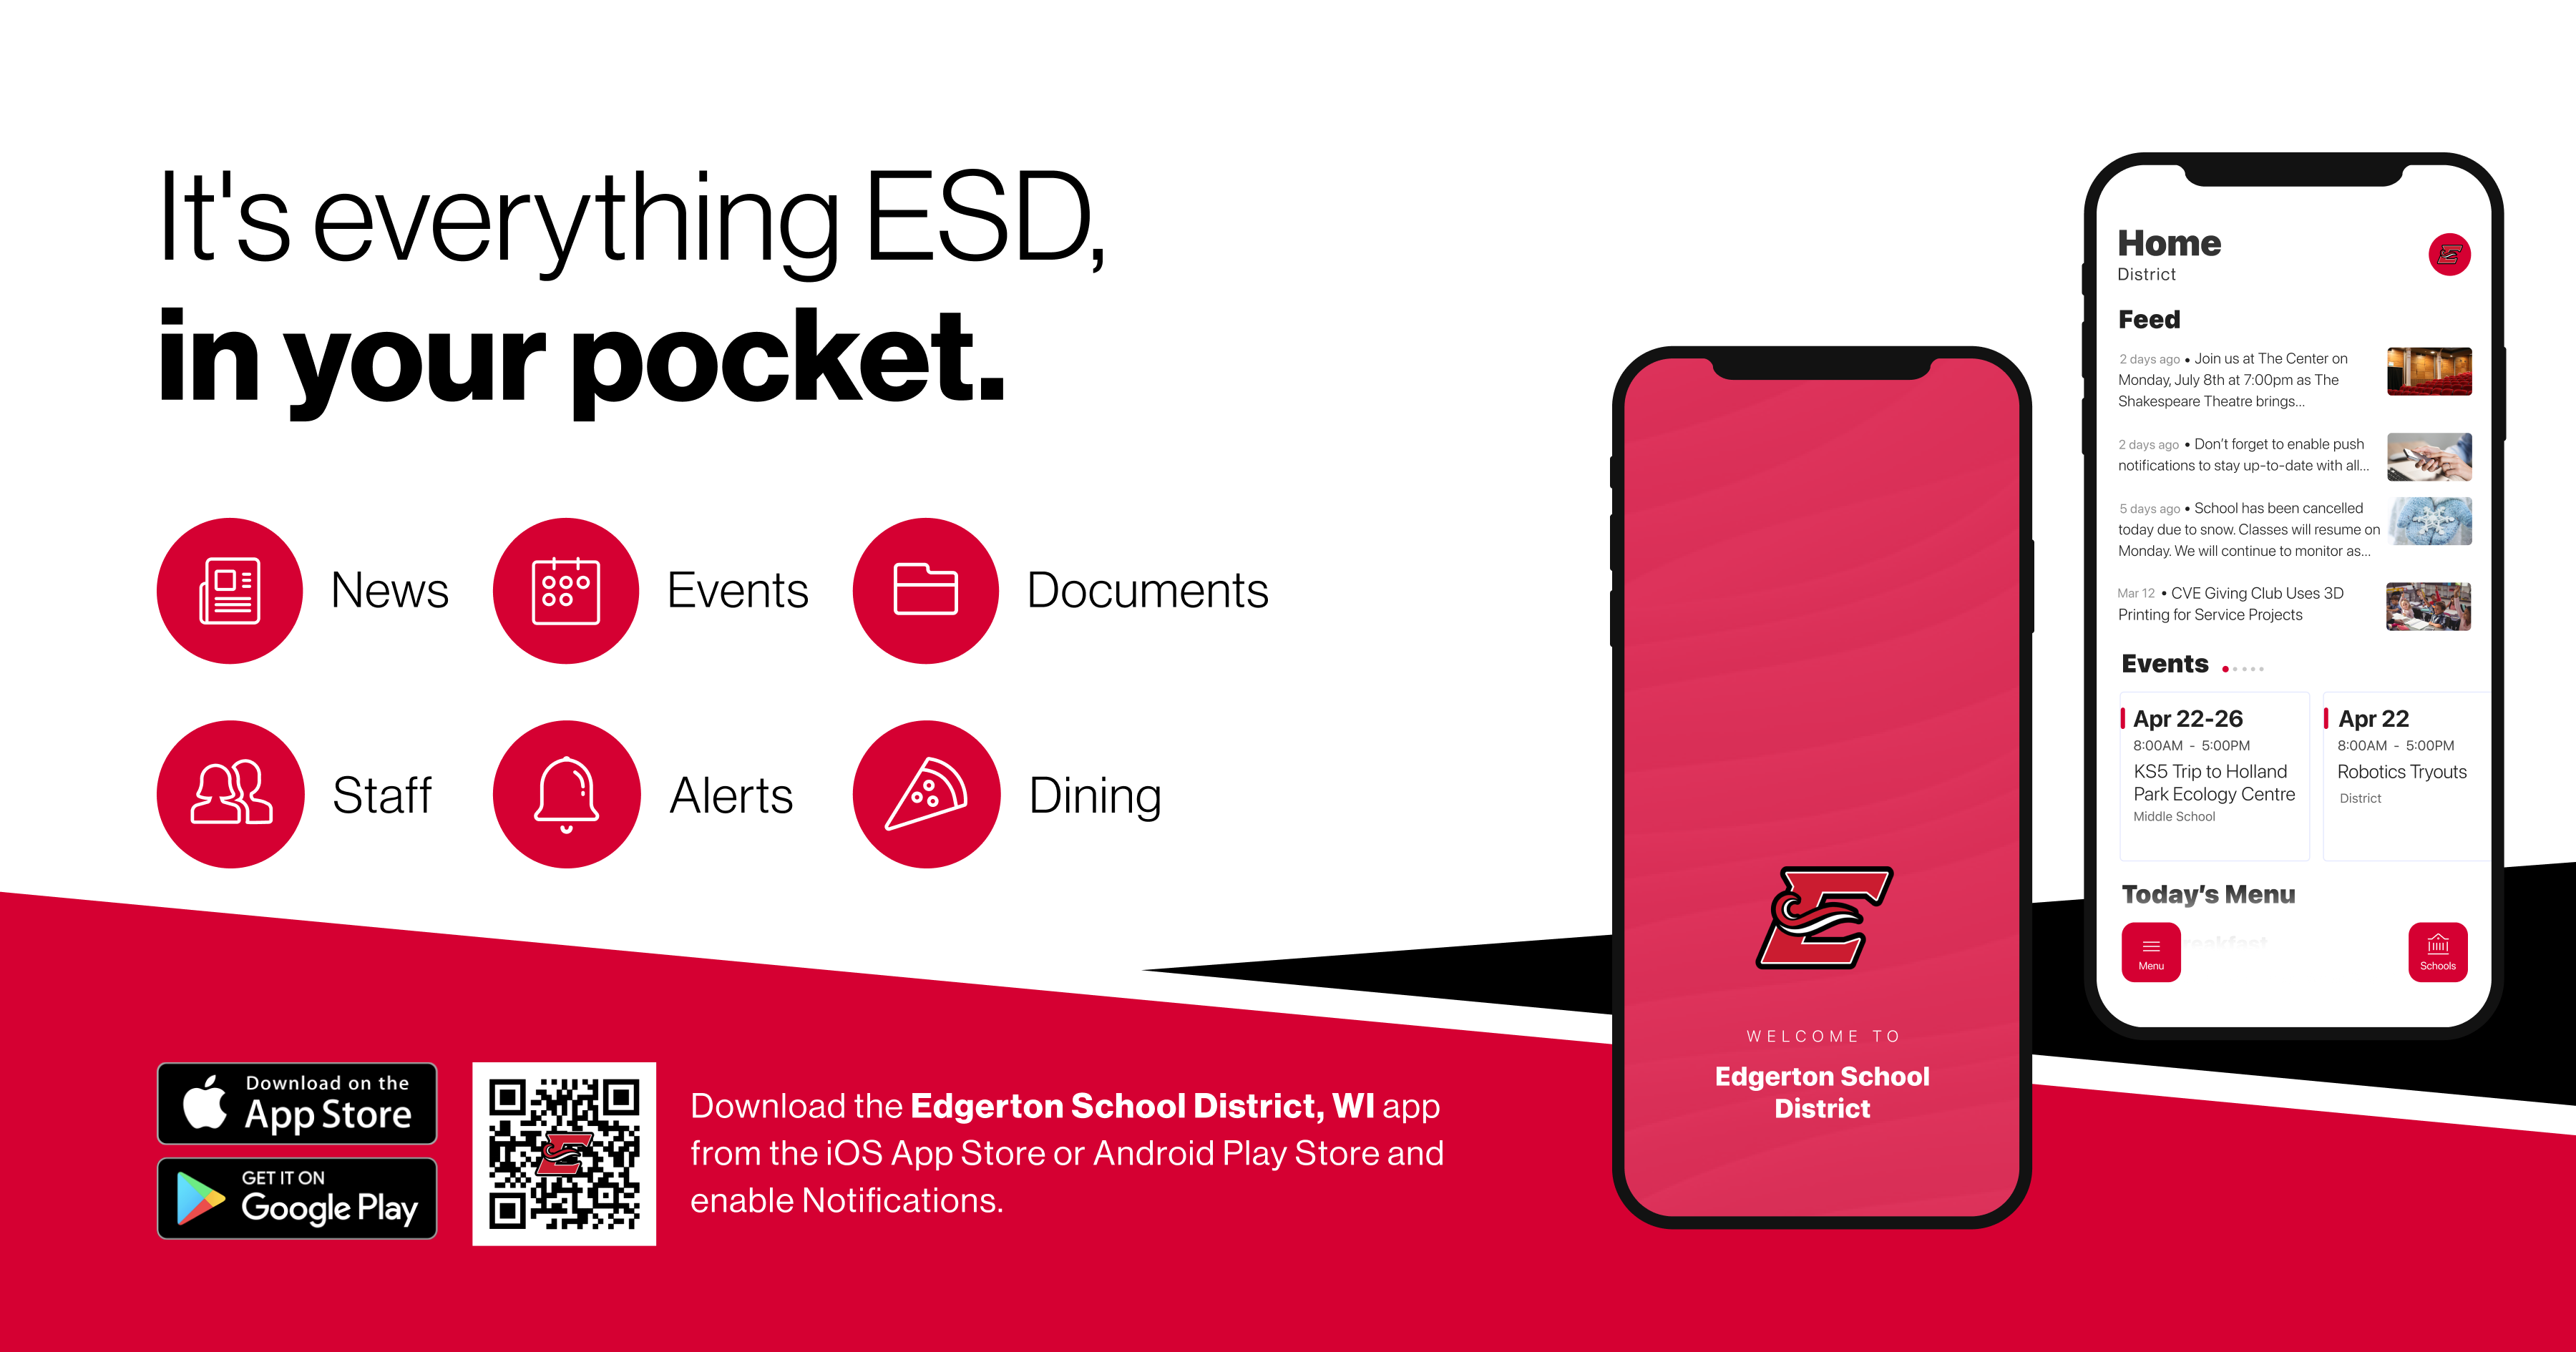 All things ESD in you pocket